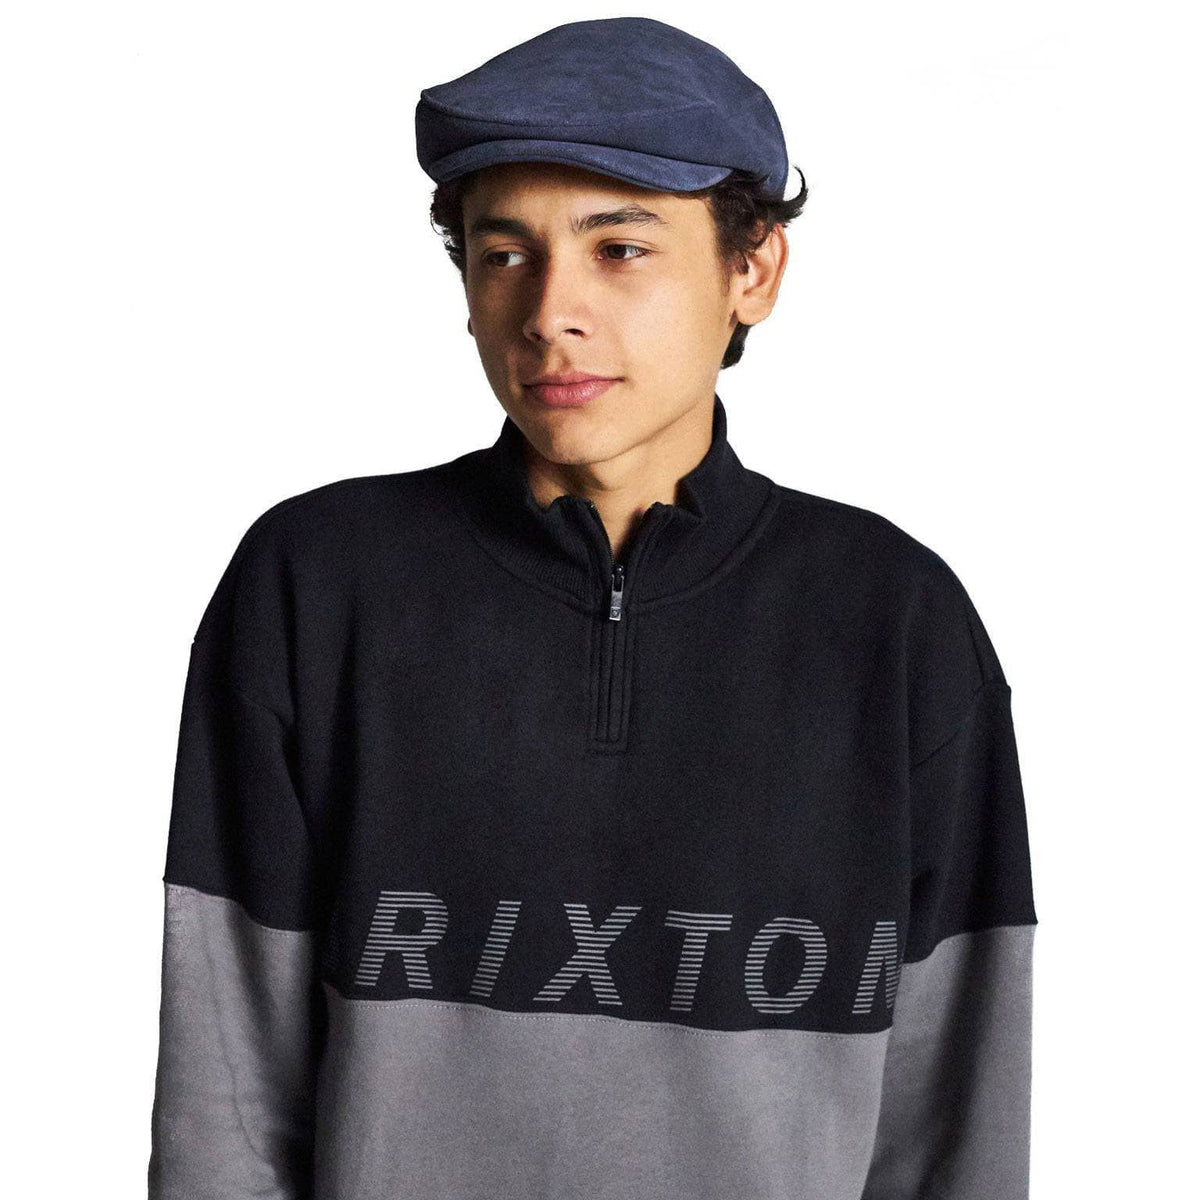 Brixton Hooligan II Real Leather Snap Cap - Washed Navy Fedora/Trilby Hat by Brixton